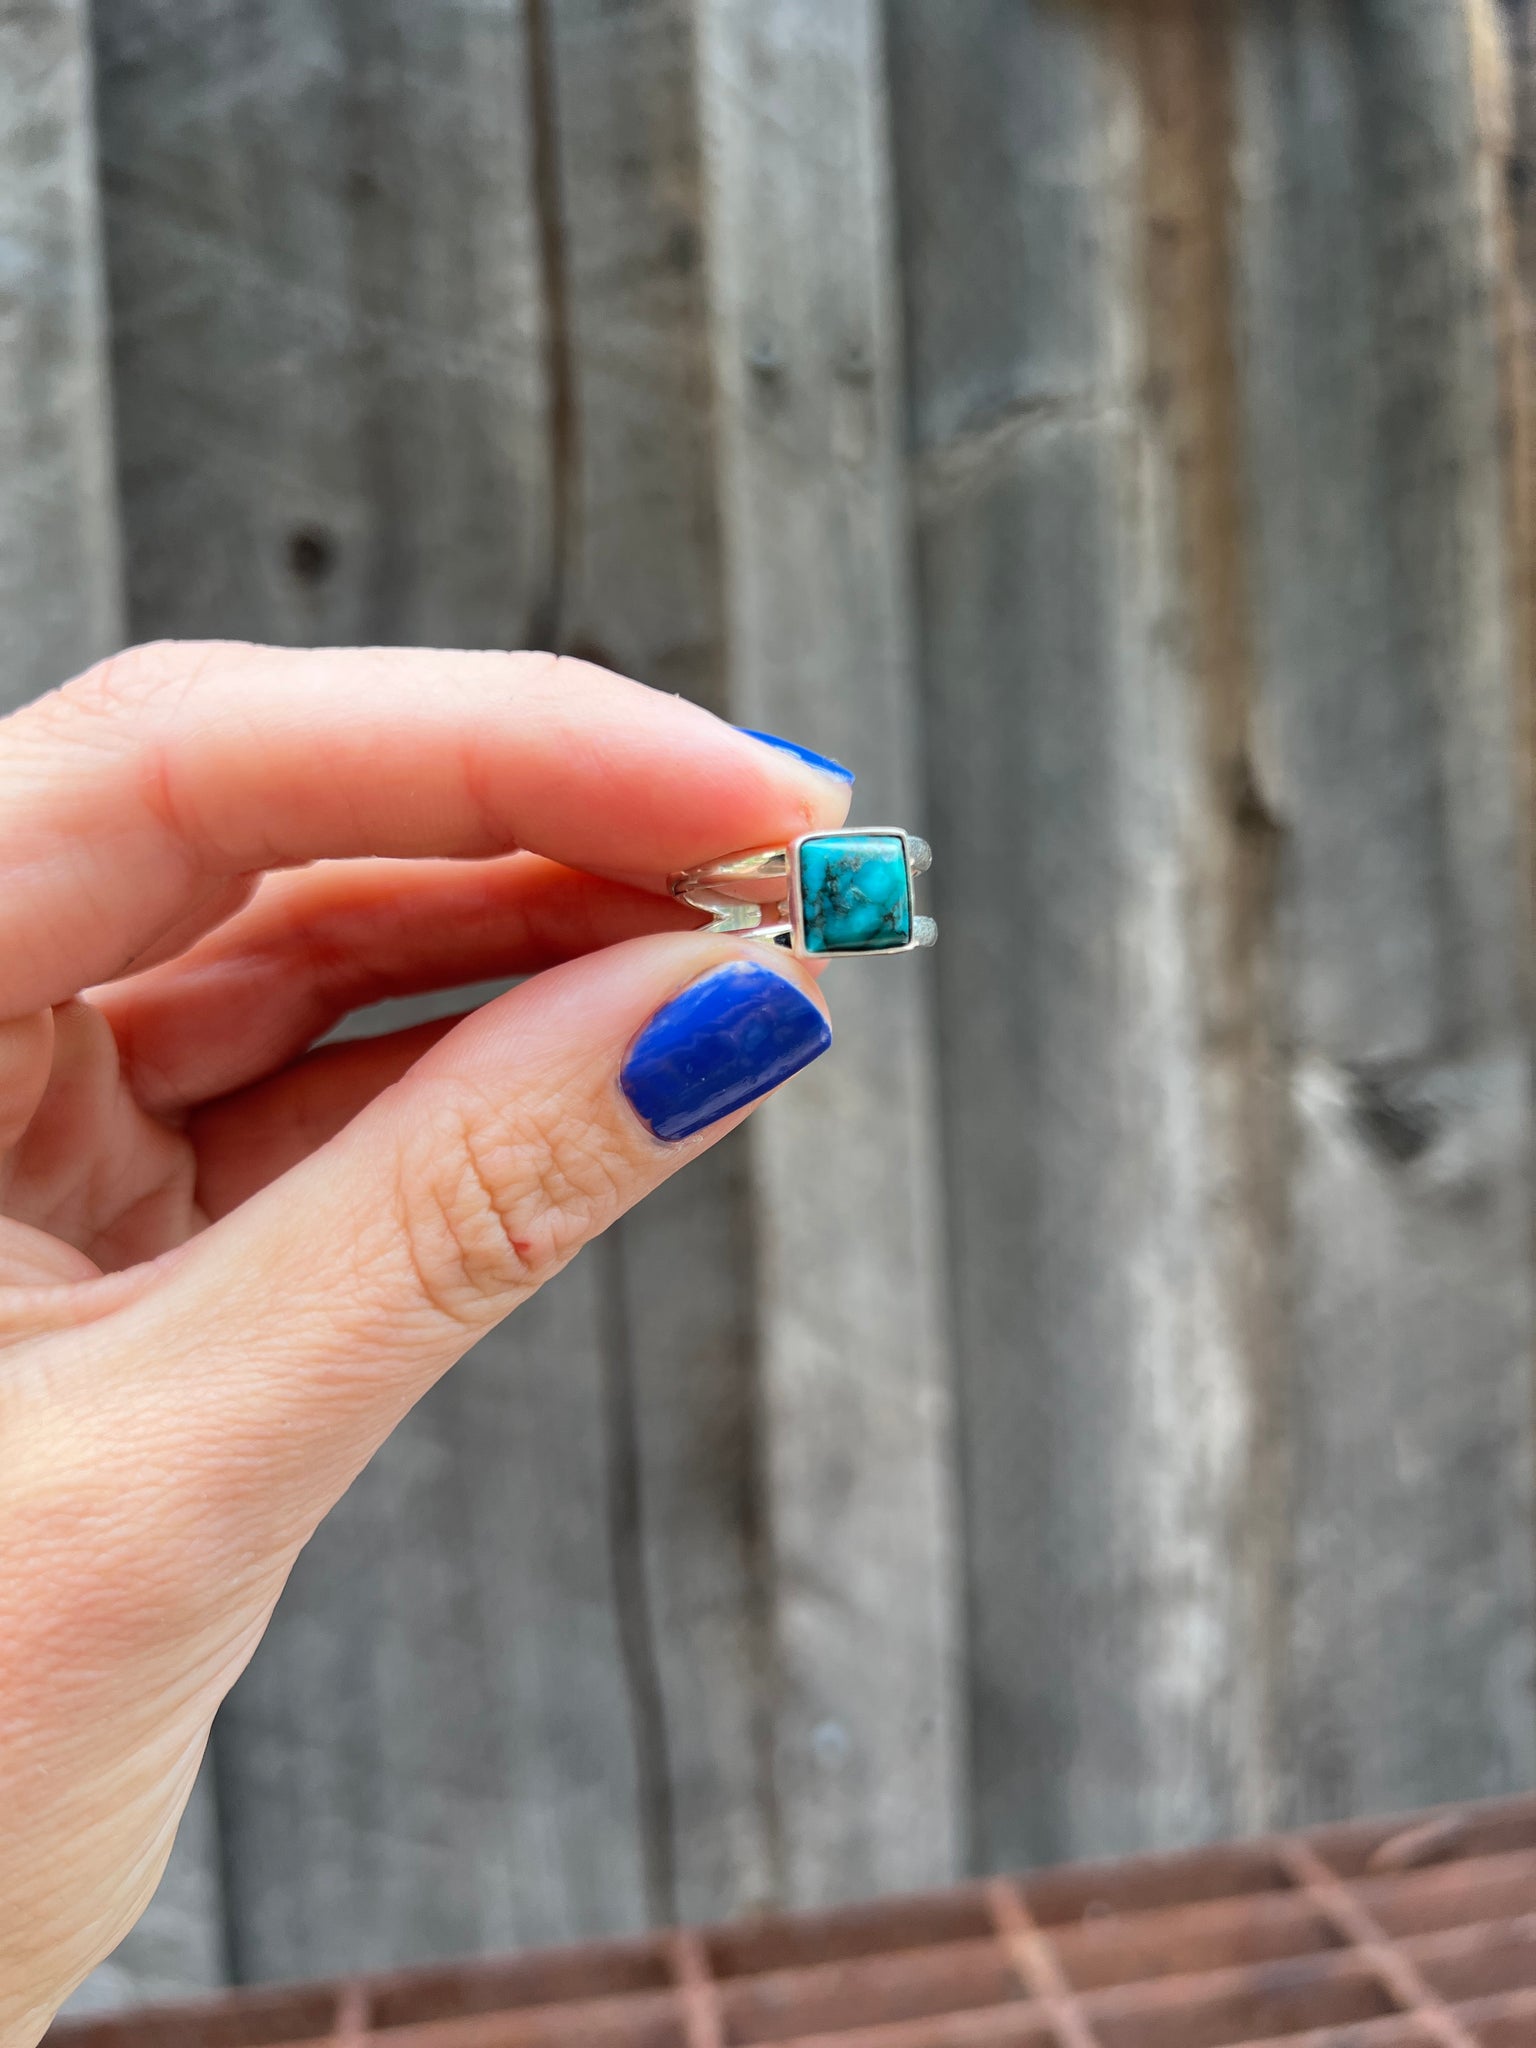 Turquoise Square double band ring in gold alchemia- adjustable